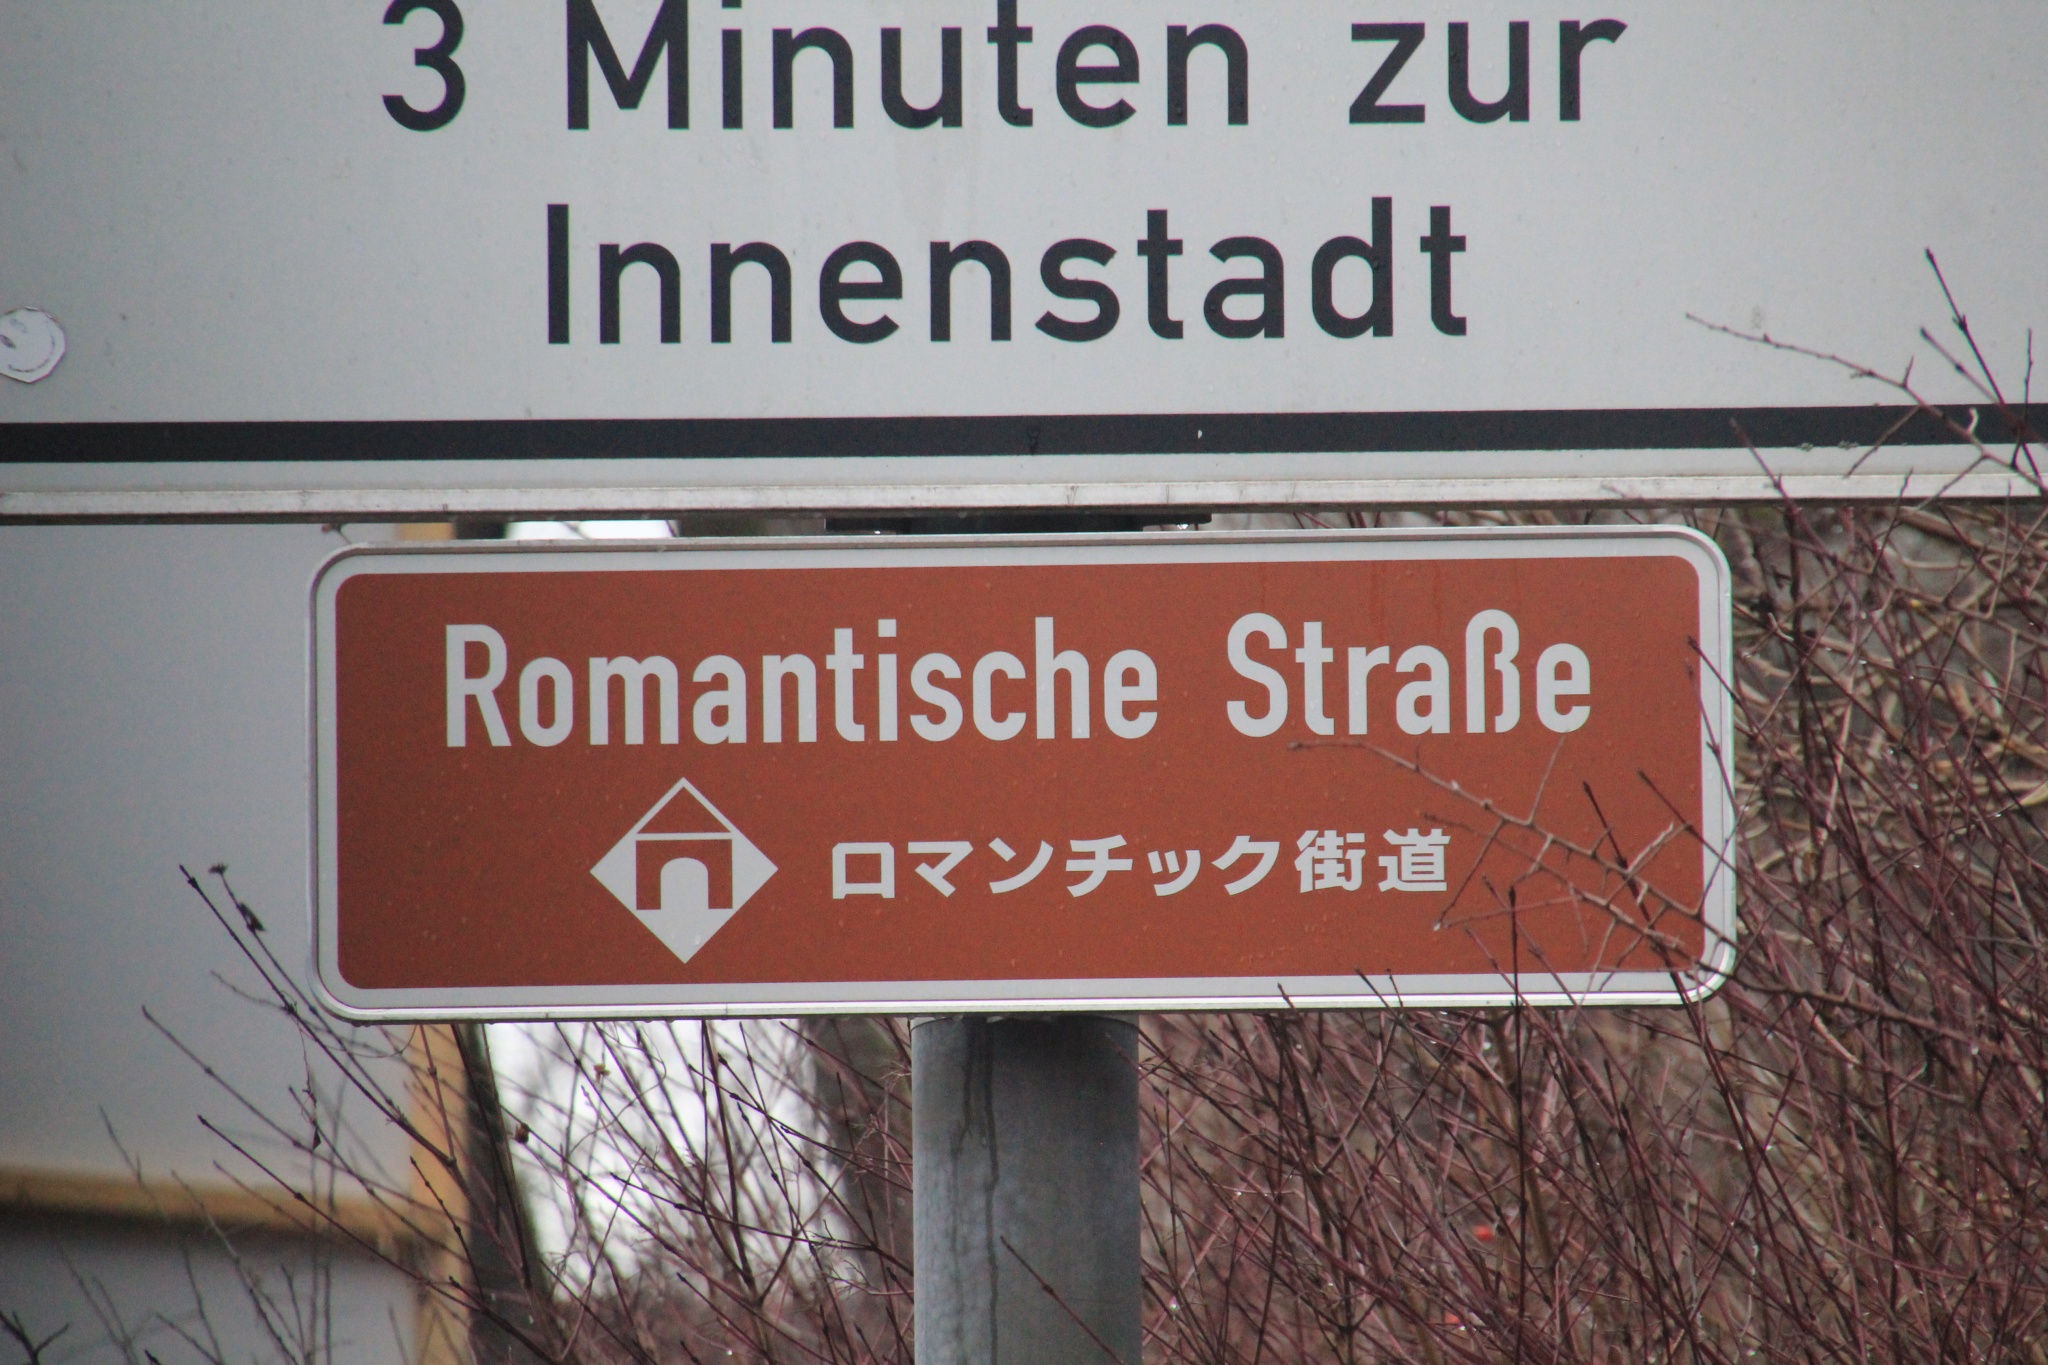 The Romantic Road is a 350-kilometer highway route in Germany between Würzburg and Füssen that links 27 medieval towns.